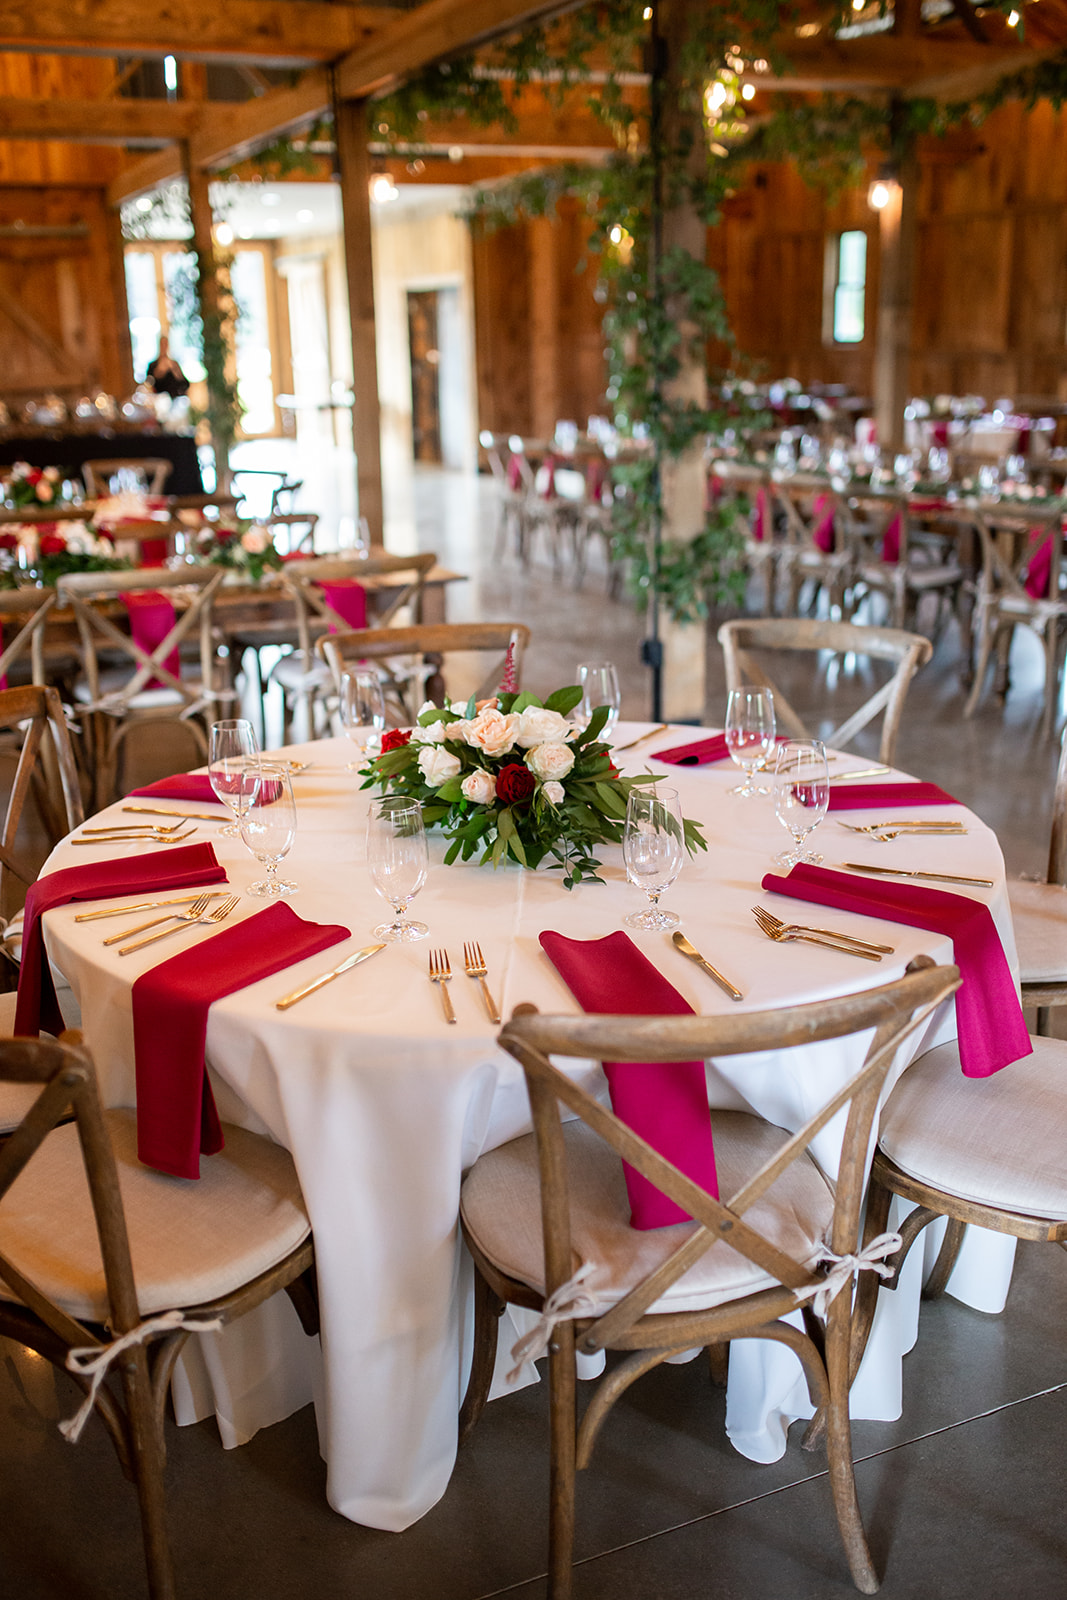 Red and white wedding table decor